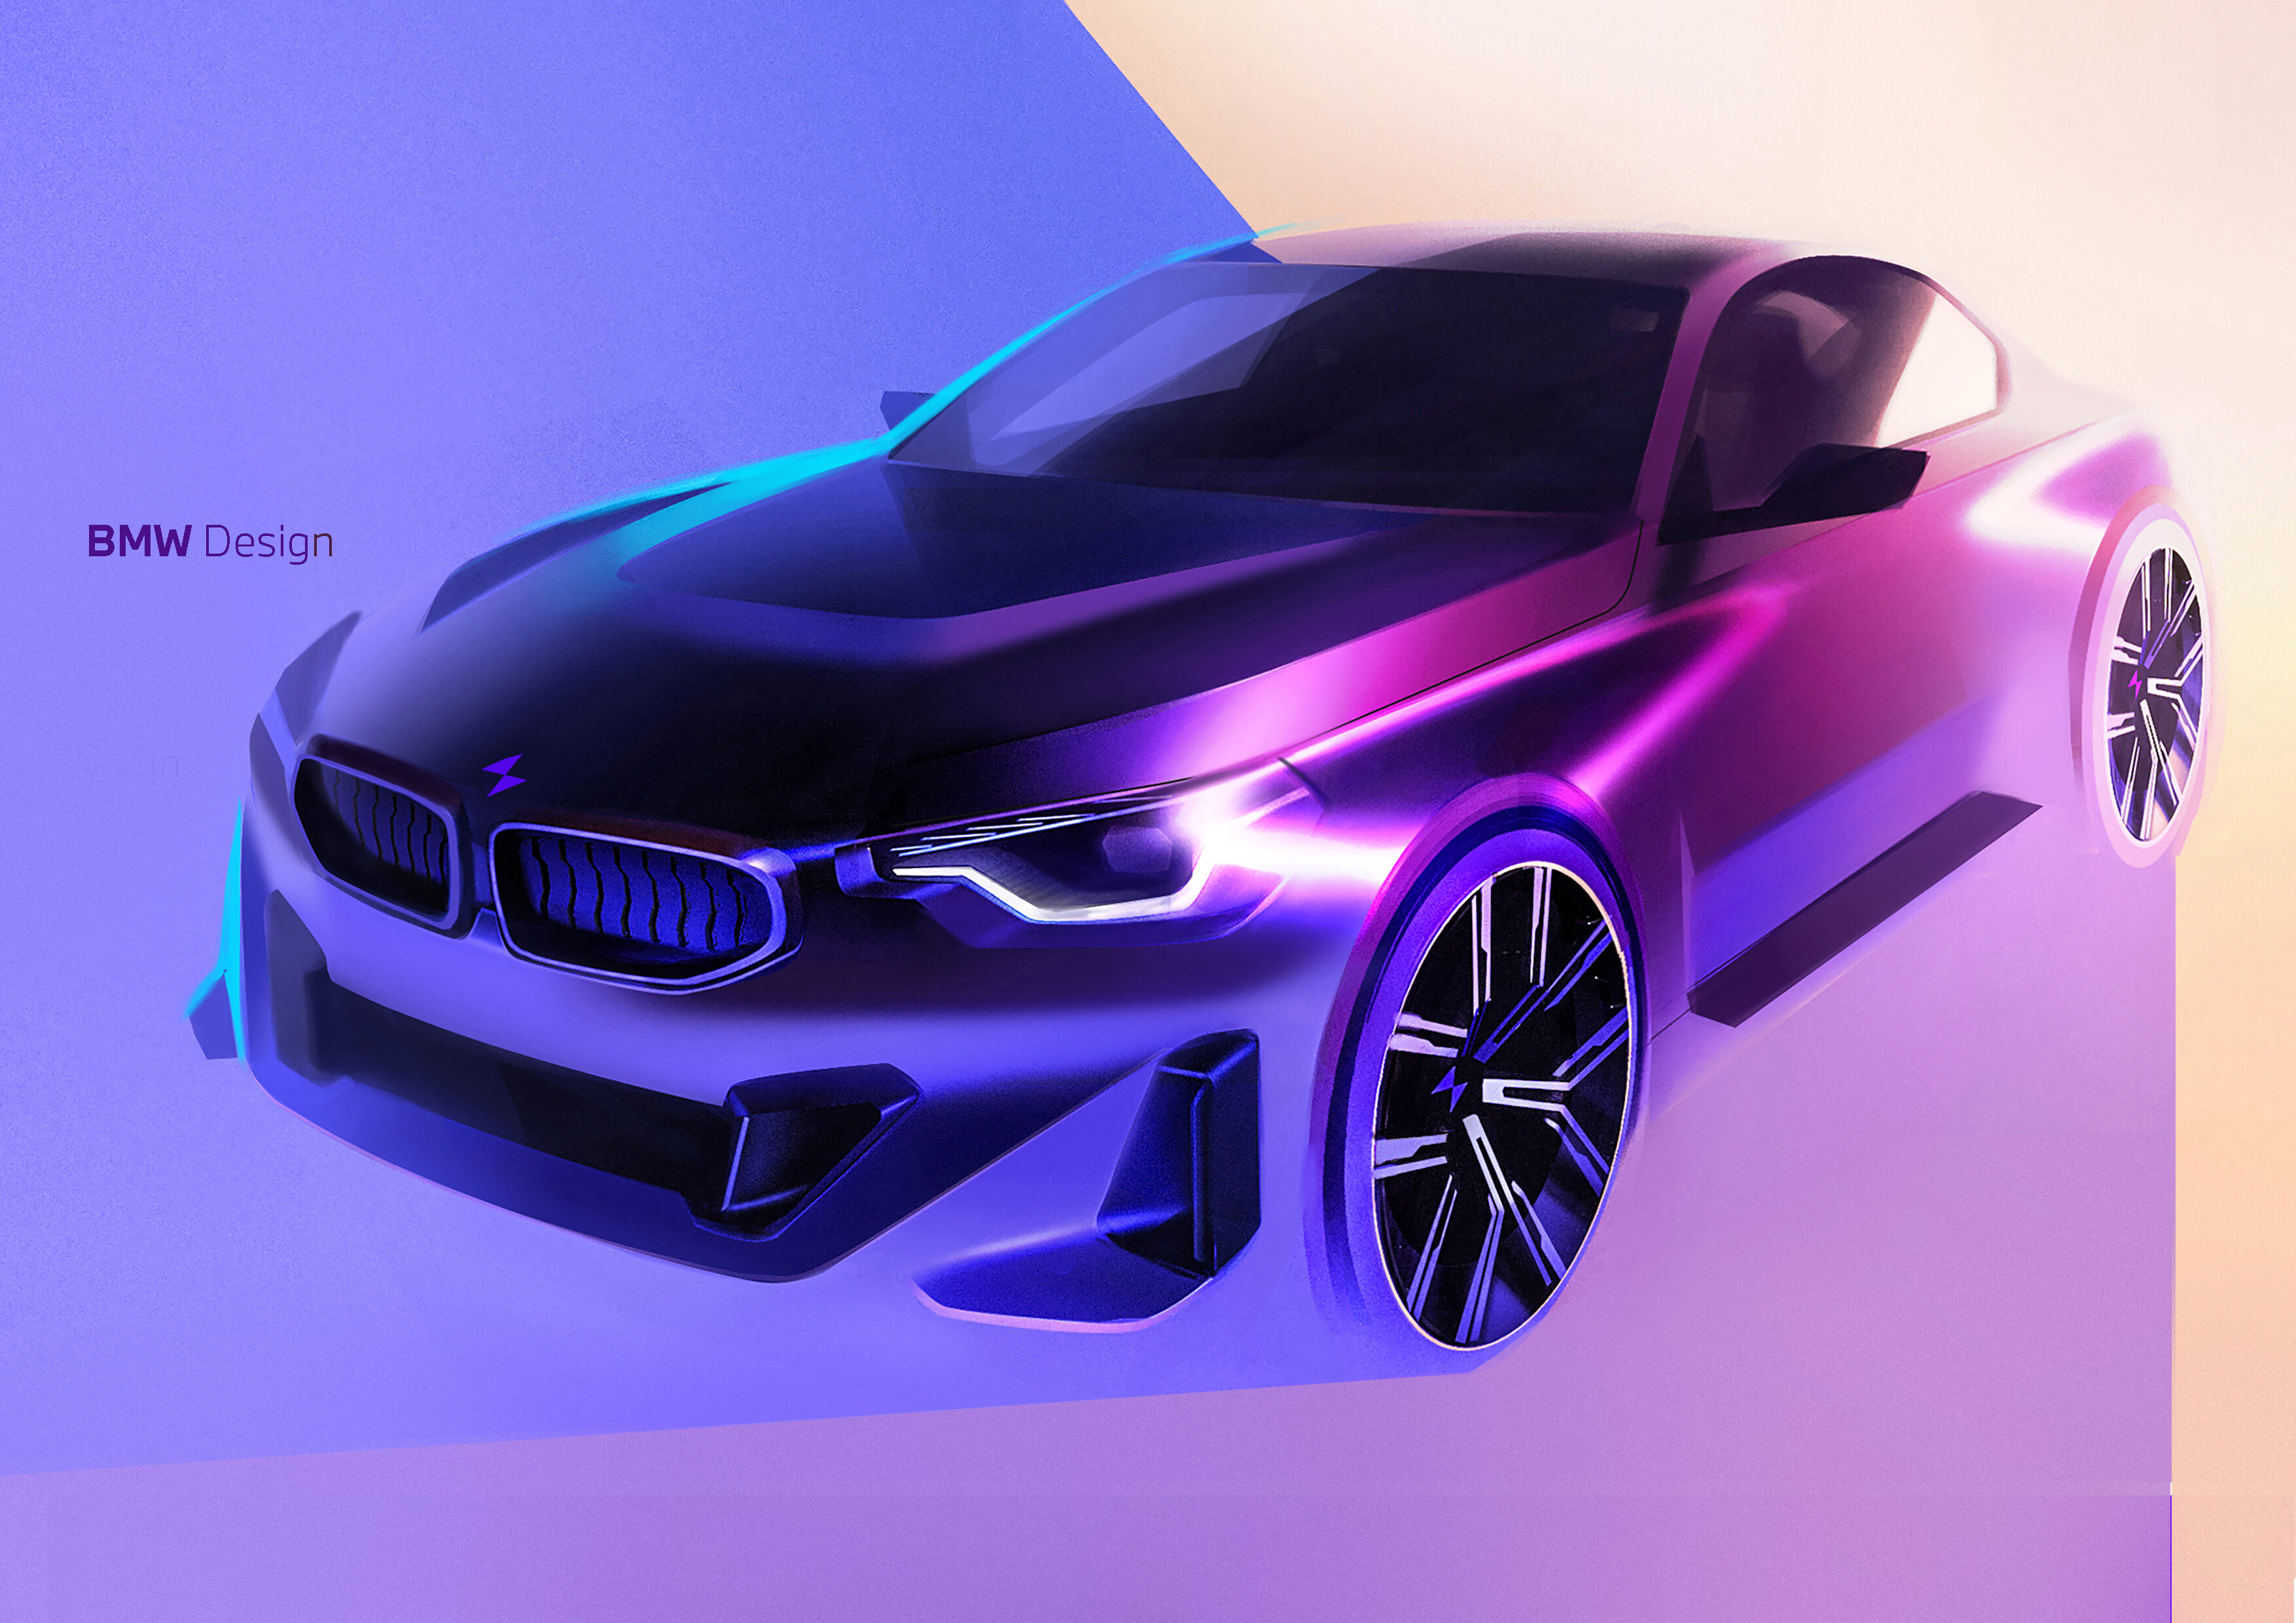 2022 BMW 2 Series design sketches tease new M2â€™s aggressive styling